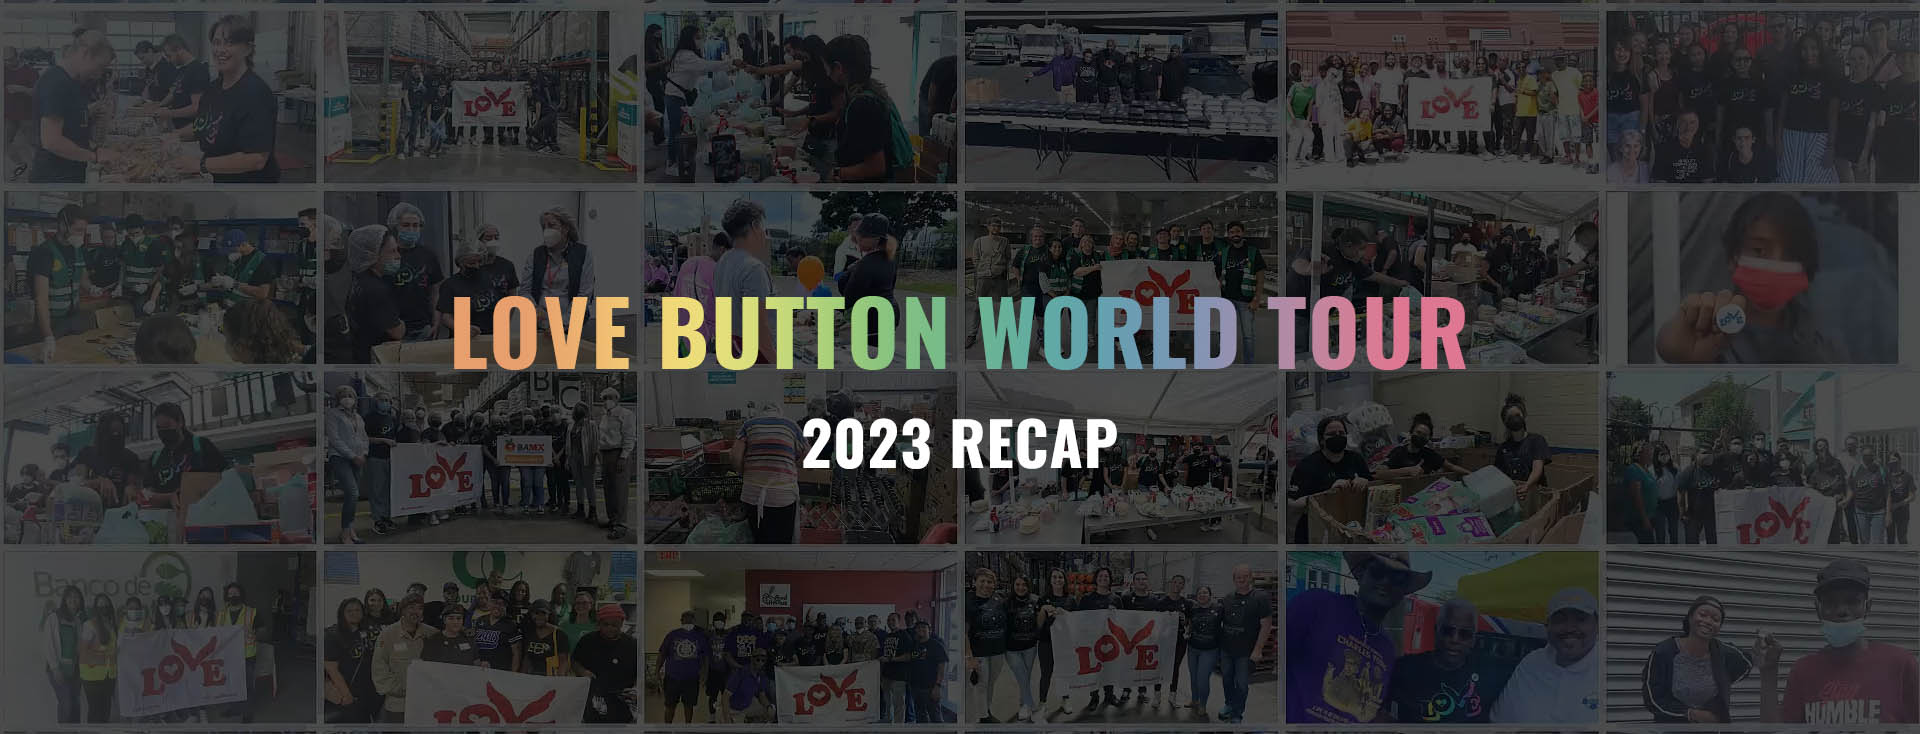 Love Button's Global Impact in 2023 on Coldplay's World Tour